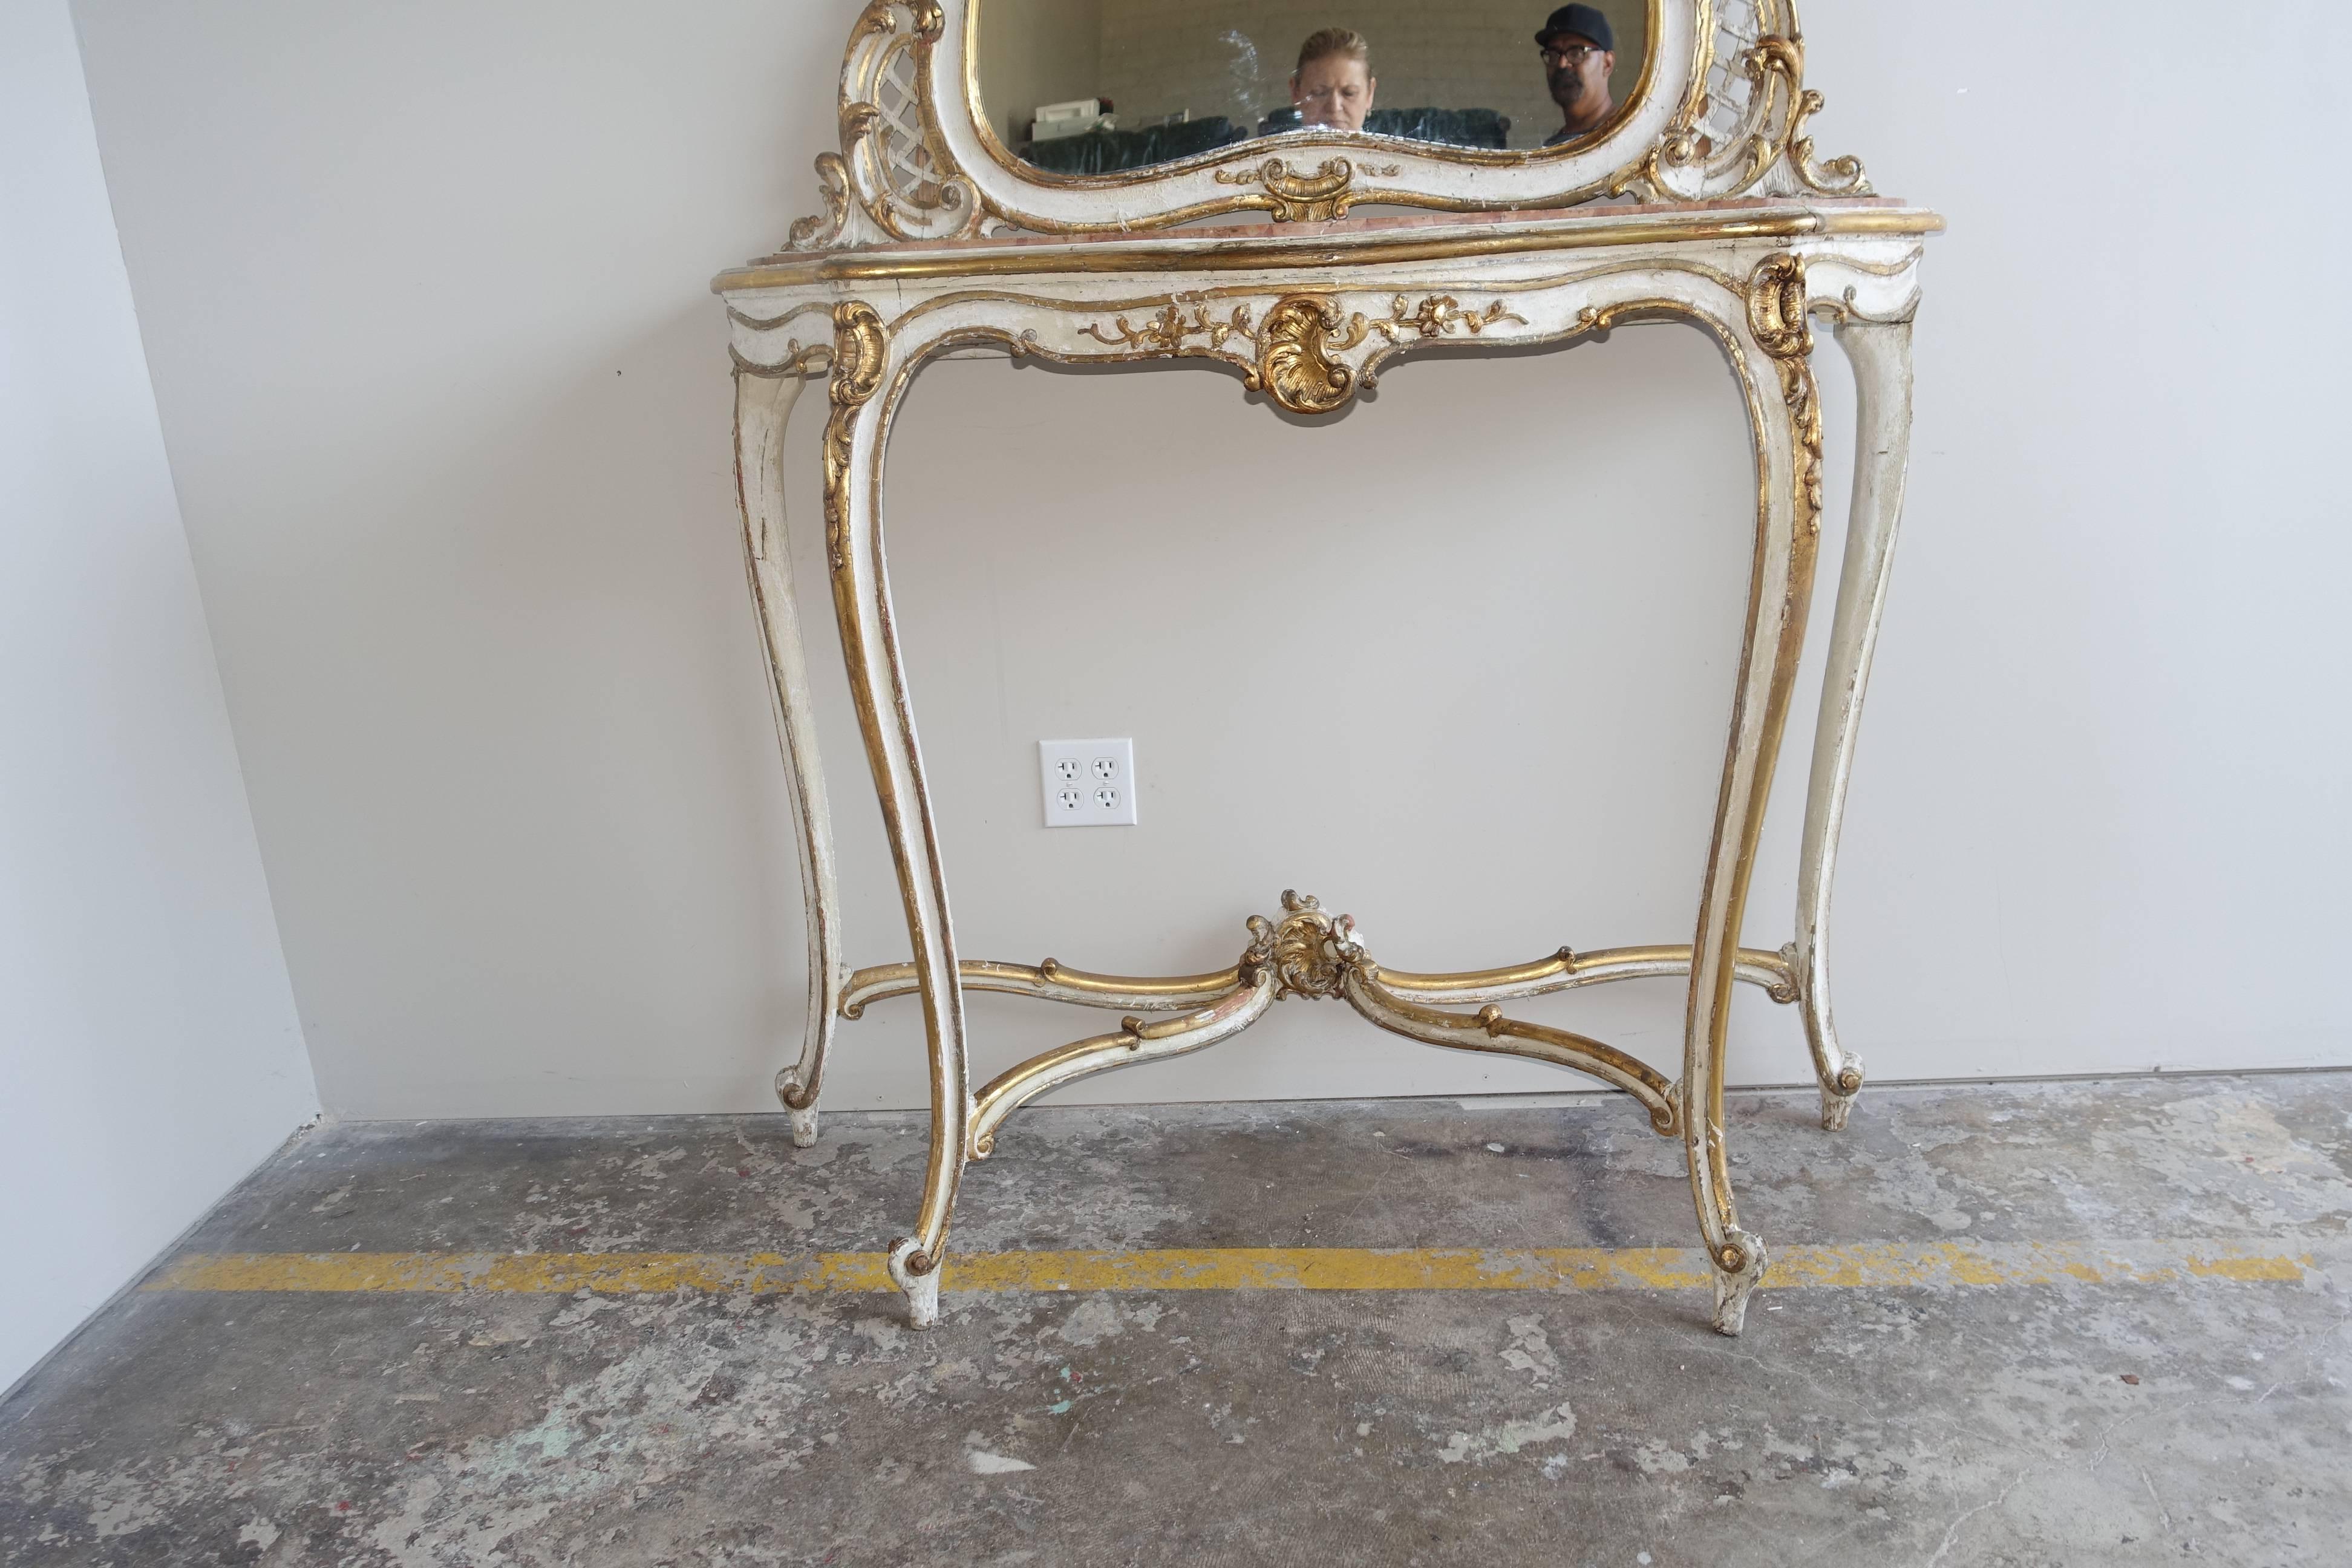 Louis XVI style painted and parcel-gilt console and mirror with original marble top. Console stands on four elegant cabriole legs with rams head feet. Bottom stretcher meets at center finial. Acanthus leaf detailing in 22-karat gold leaf finish.